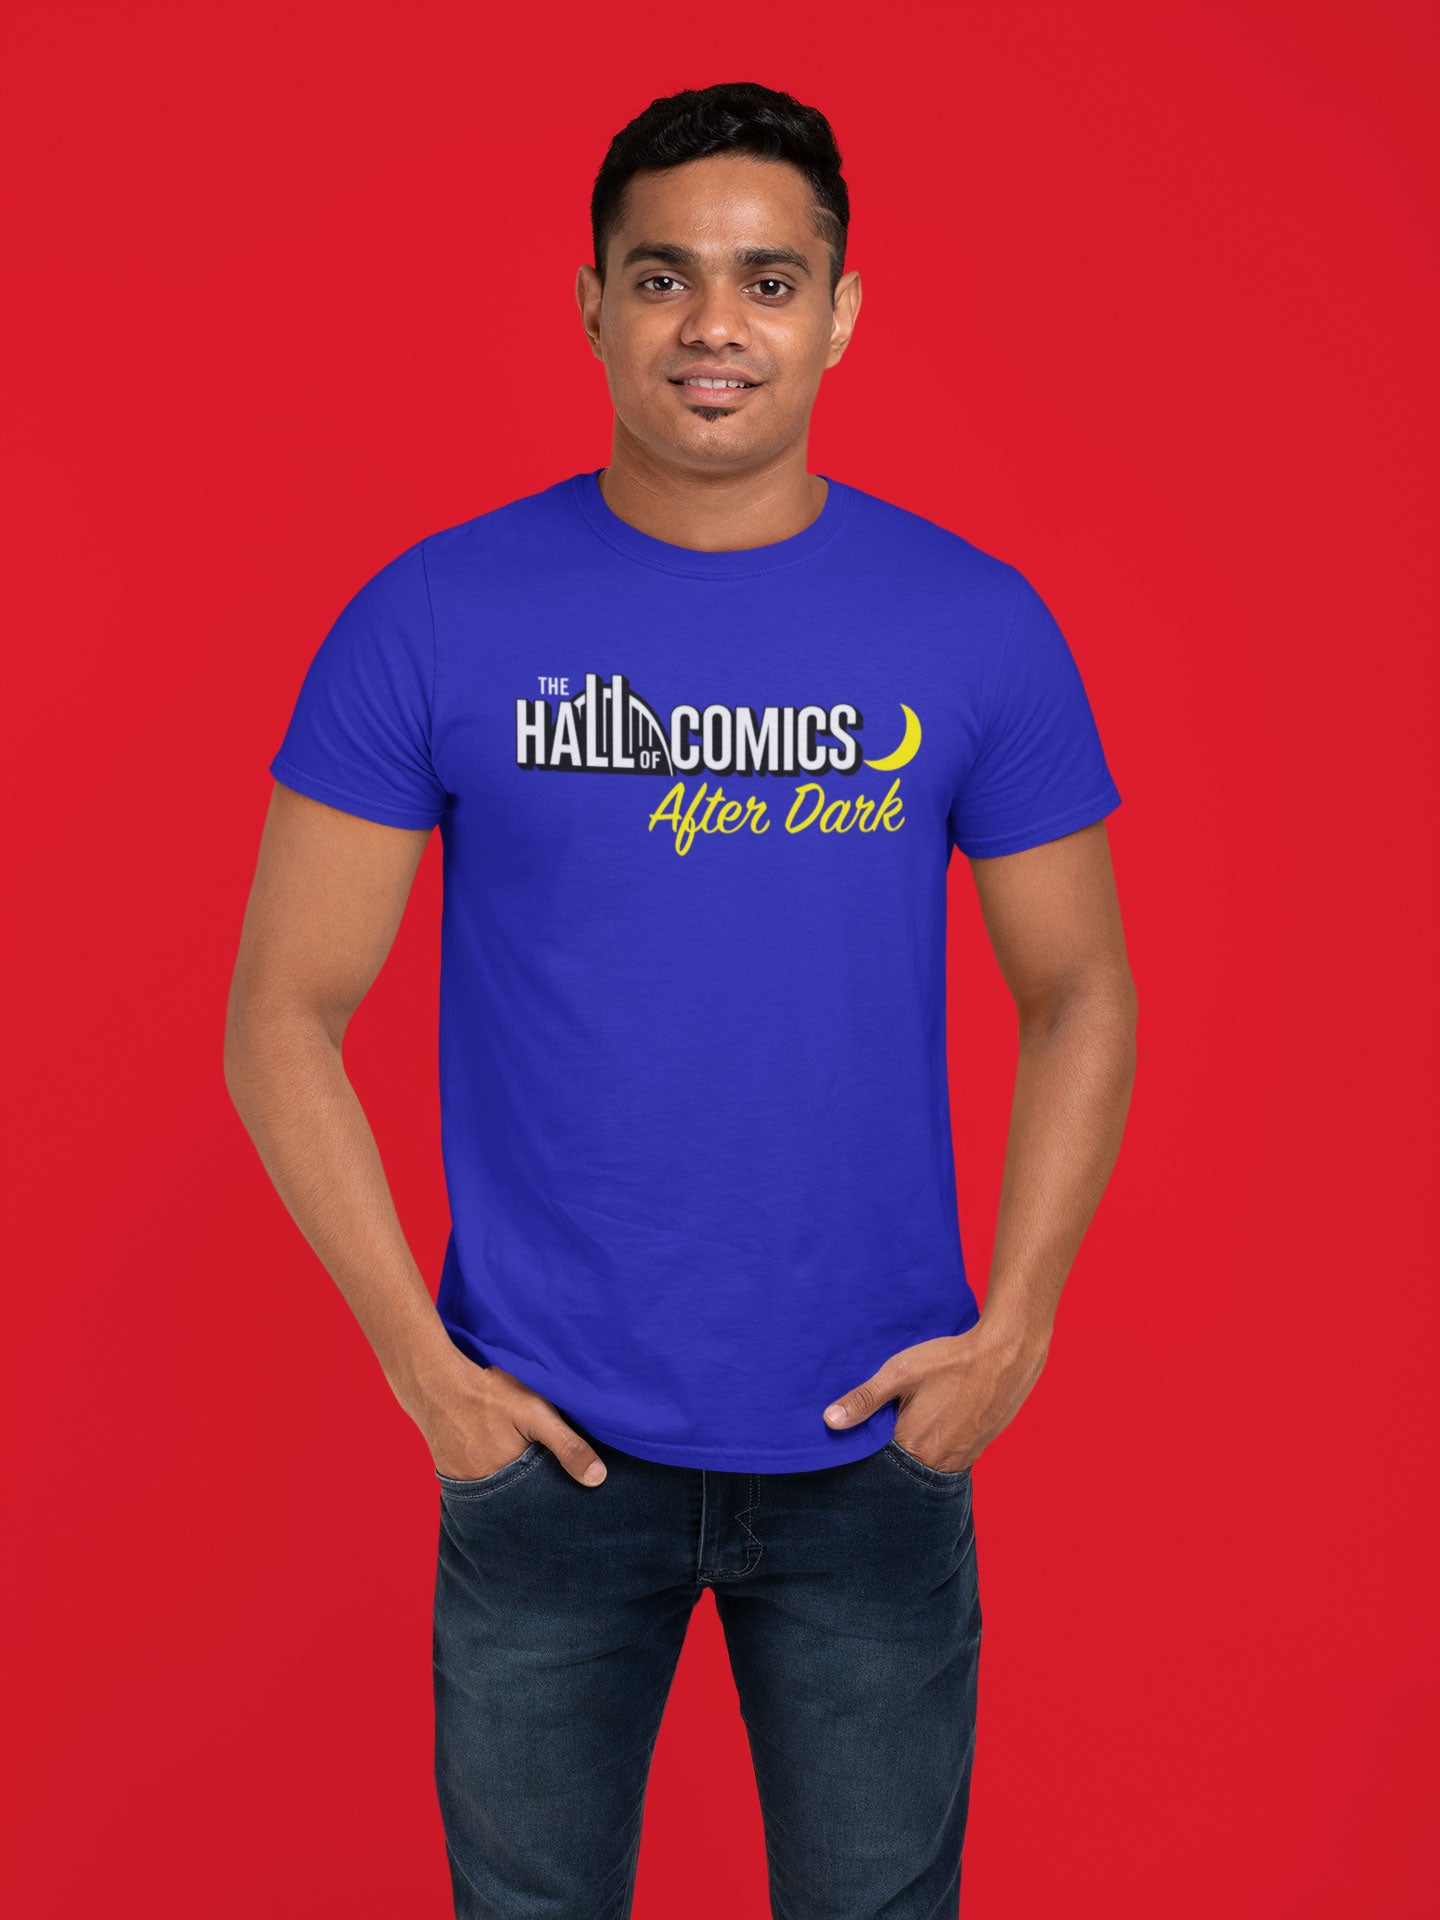 "The Hall of Comics After Dark" Glow-in-the-Dark T-Shirt